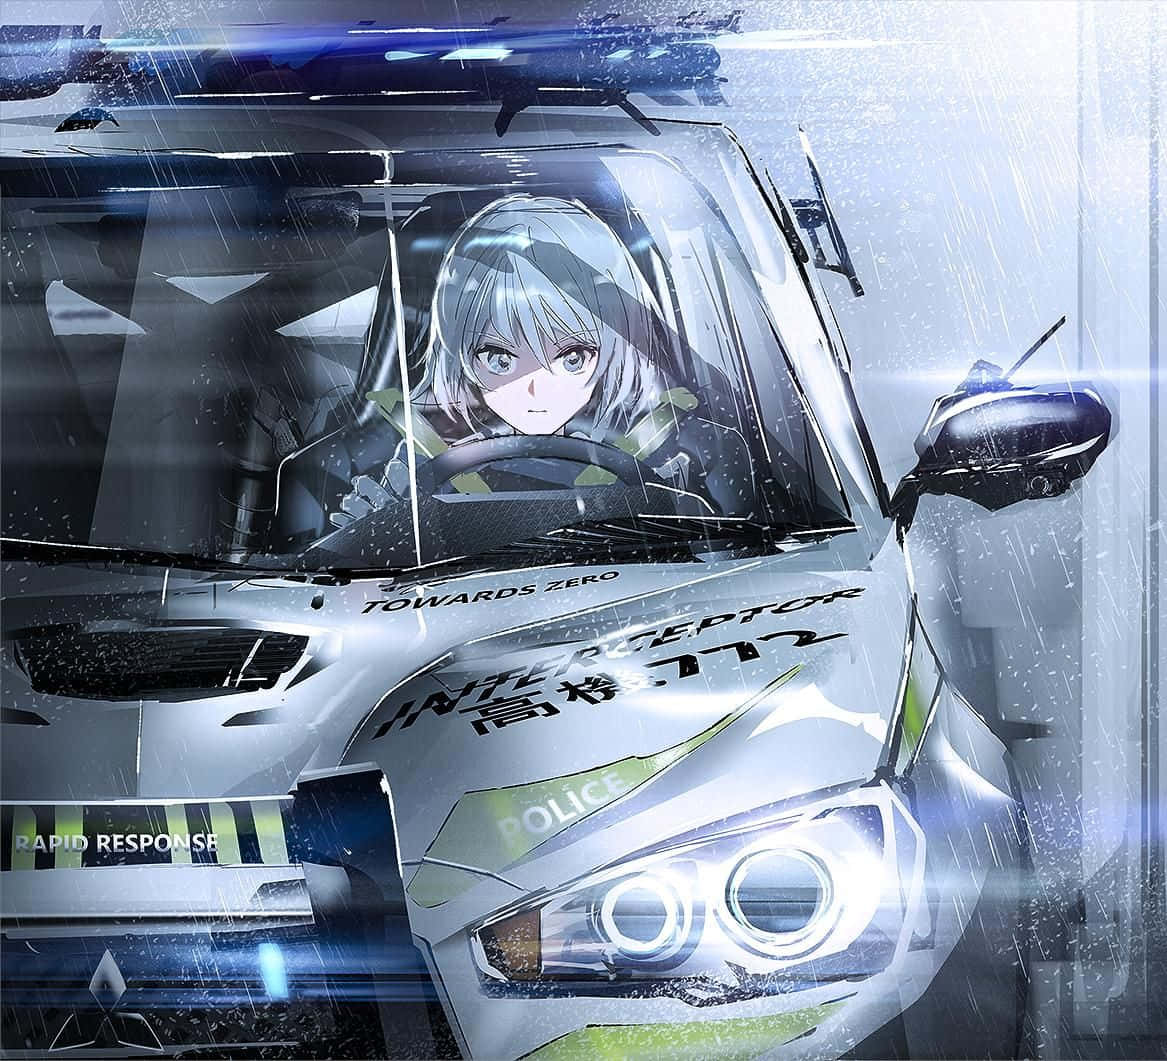 A Police Car With A Girl In The Driver's Seat